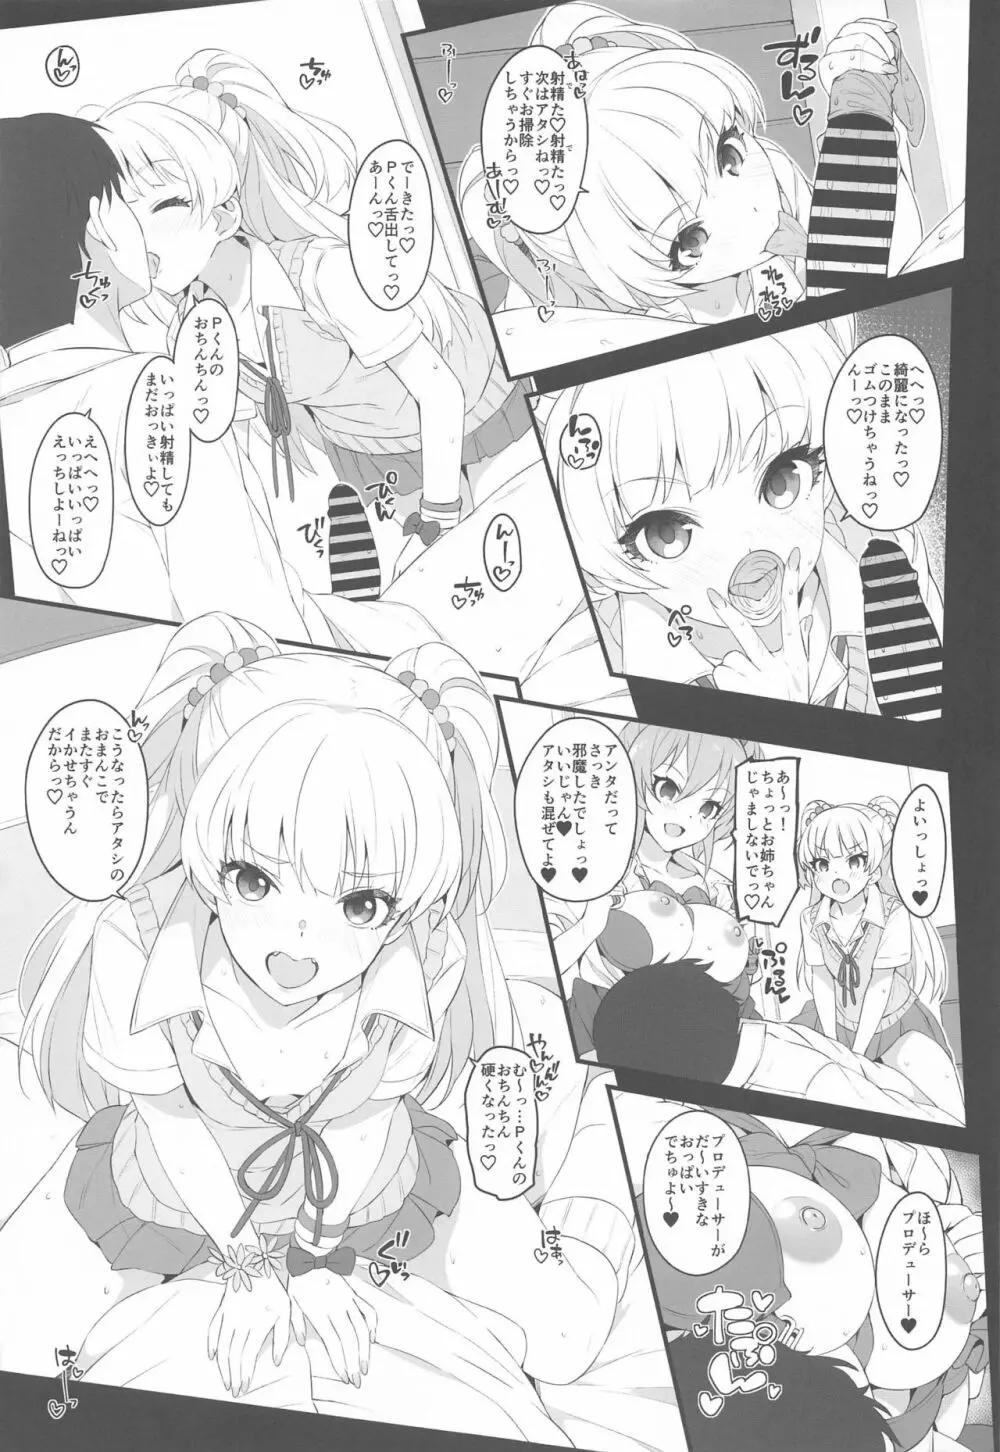 The first secret meeting of the Charismatic Queens. 16ページ